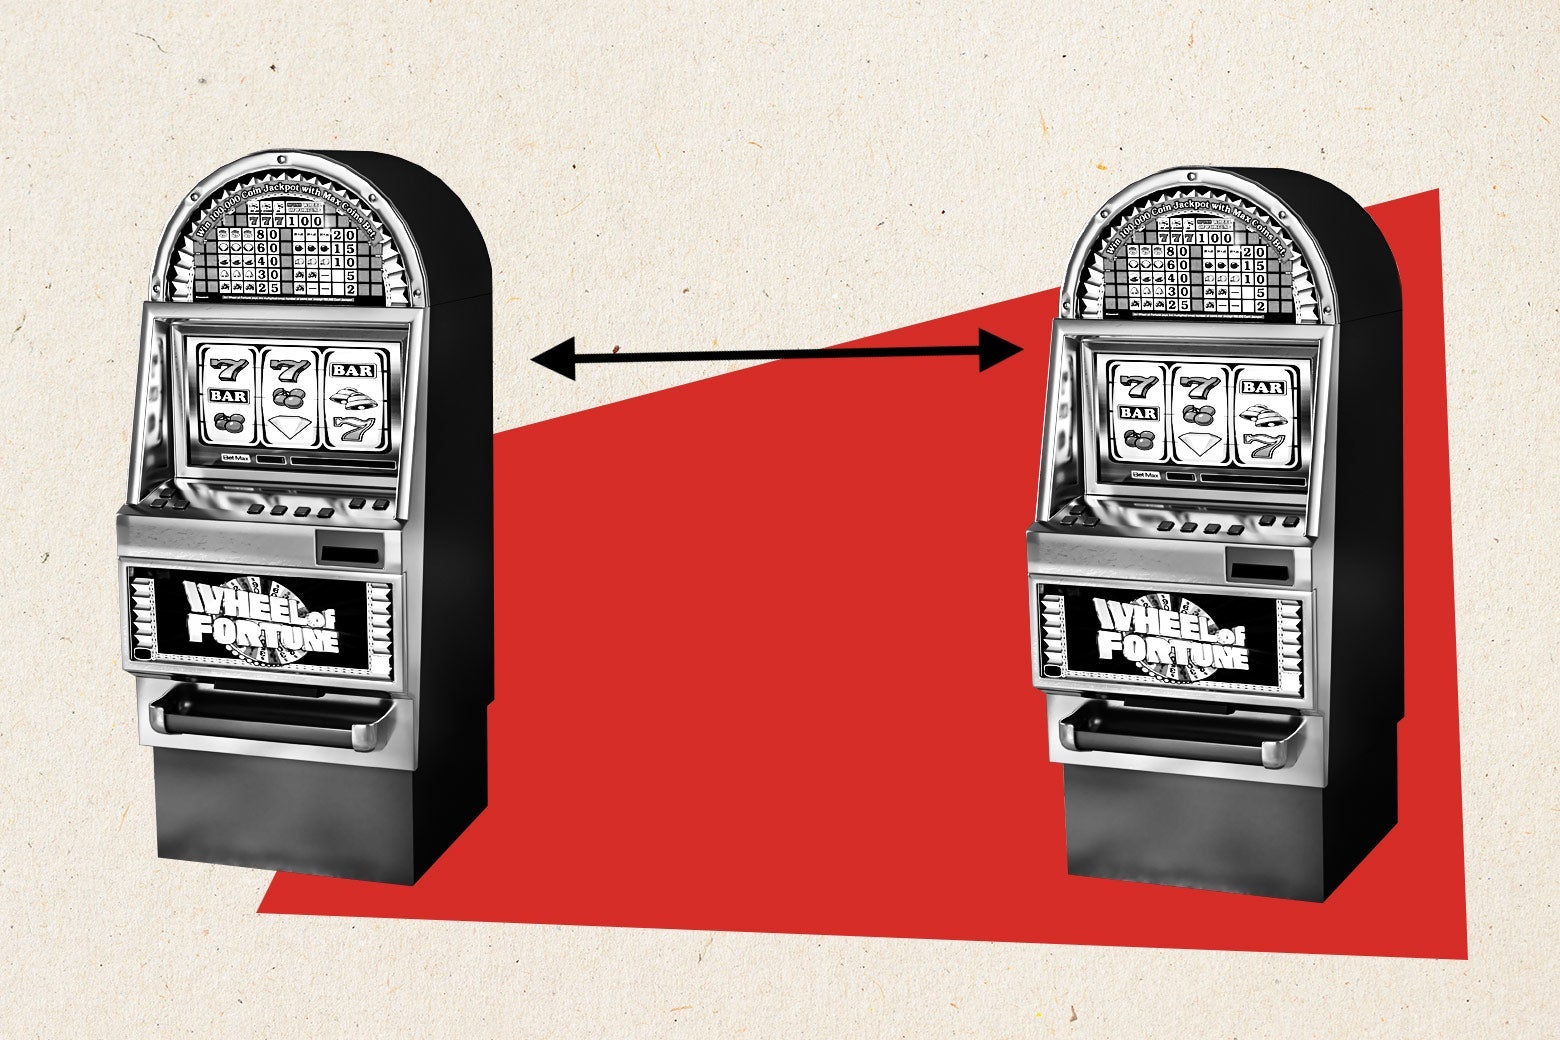 Two black-and-white slot machines on a red shape separated by an arrow.